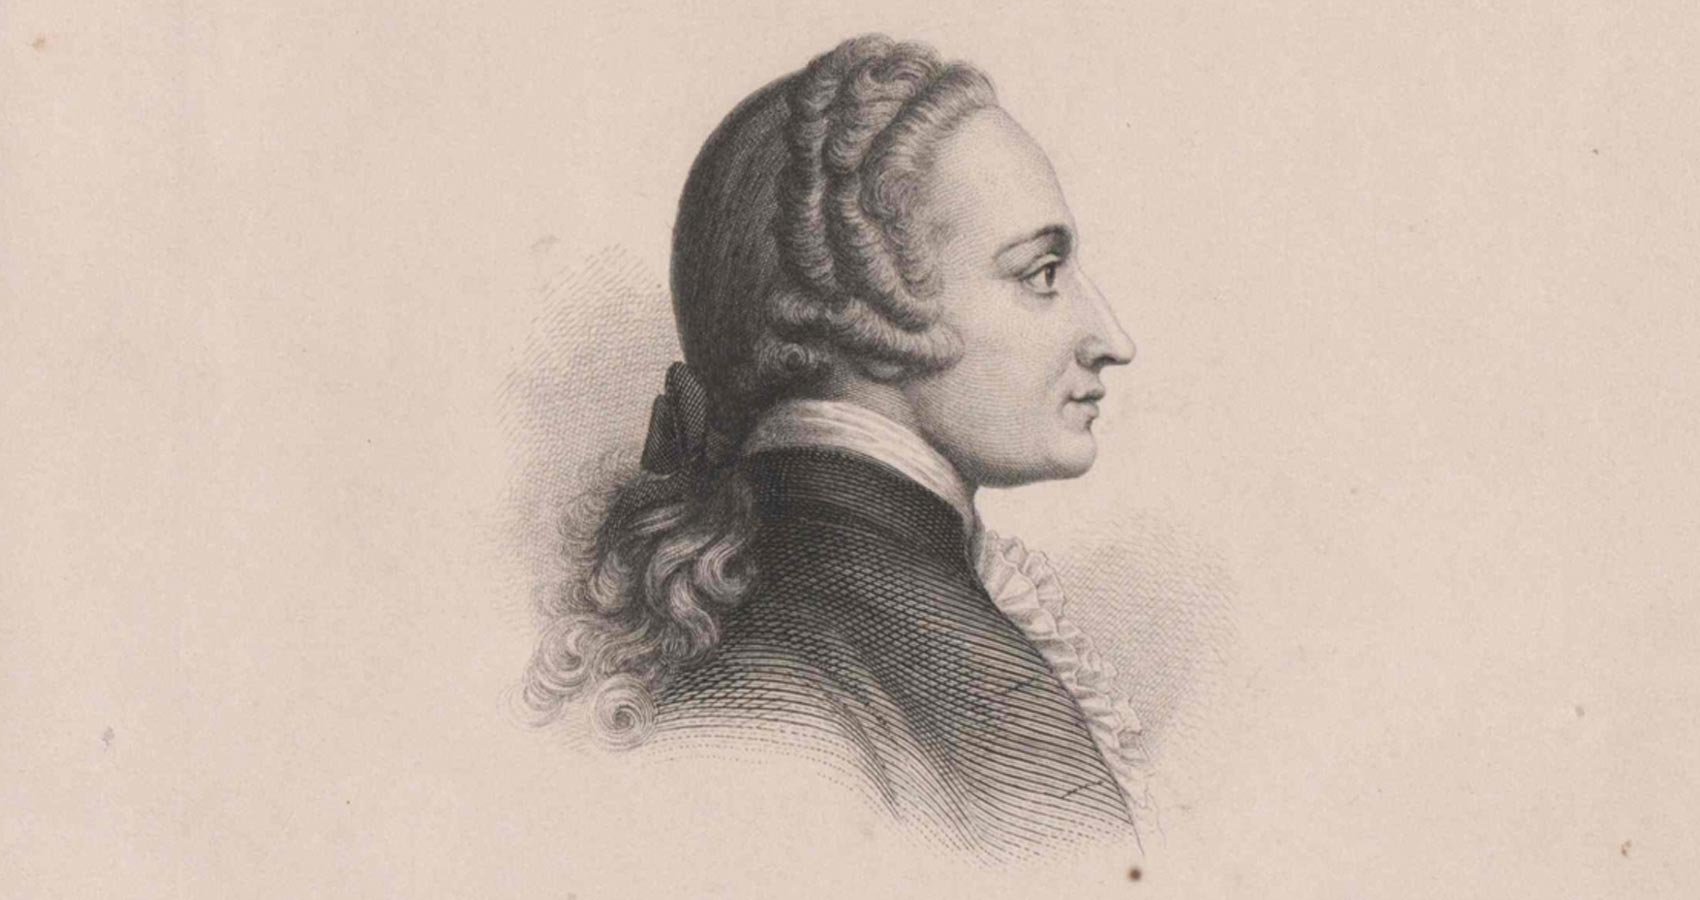 Johann Wolfgang von Goethe: A Writer of the First Rank, article by Satis Shroff at Spillwords.com